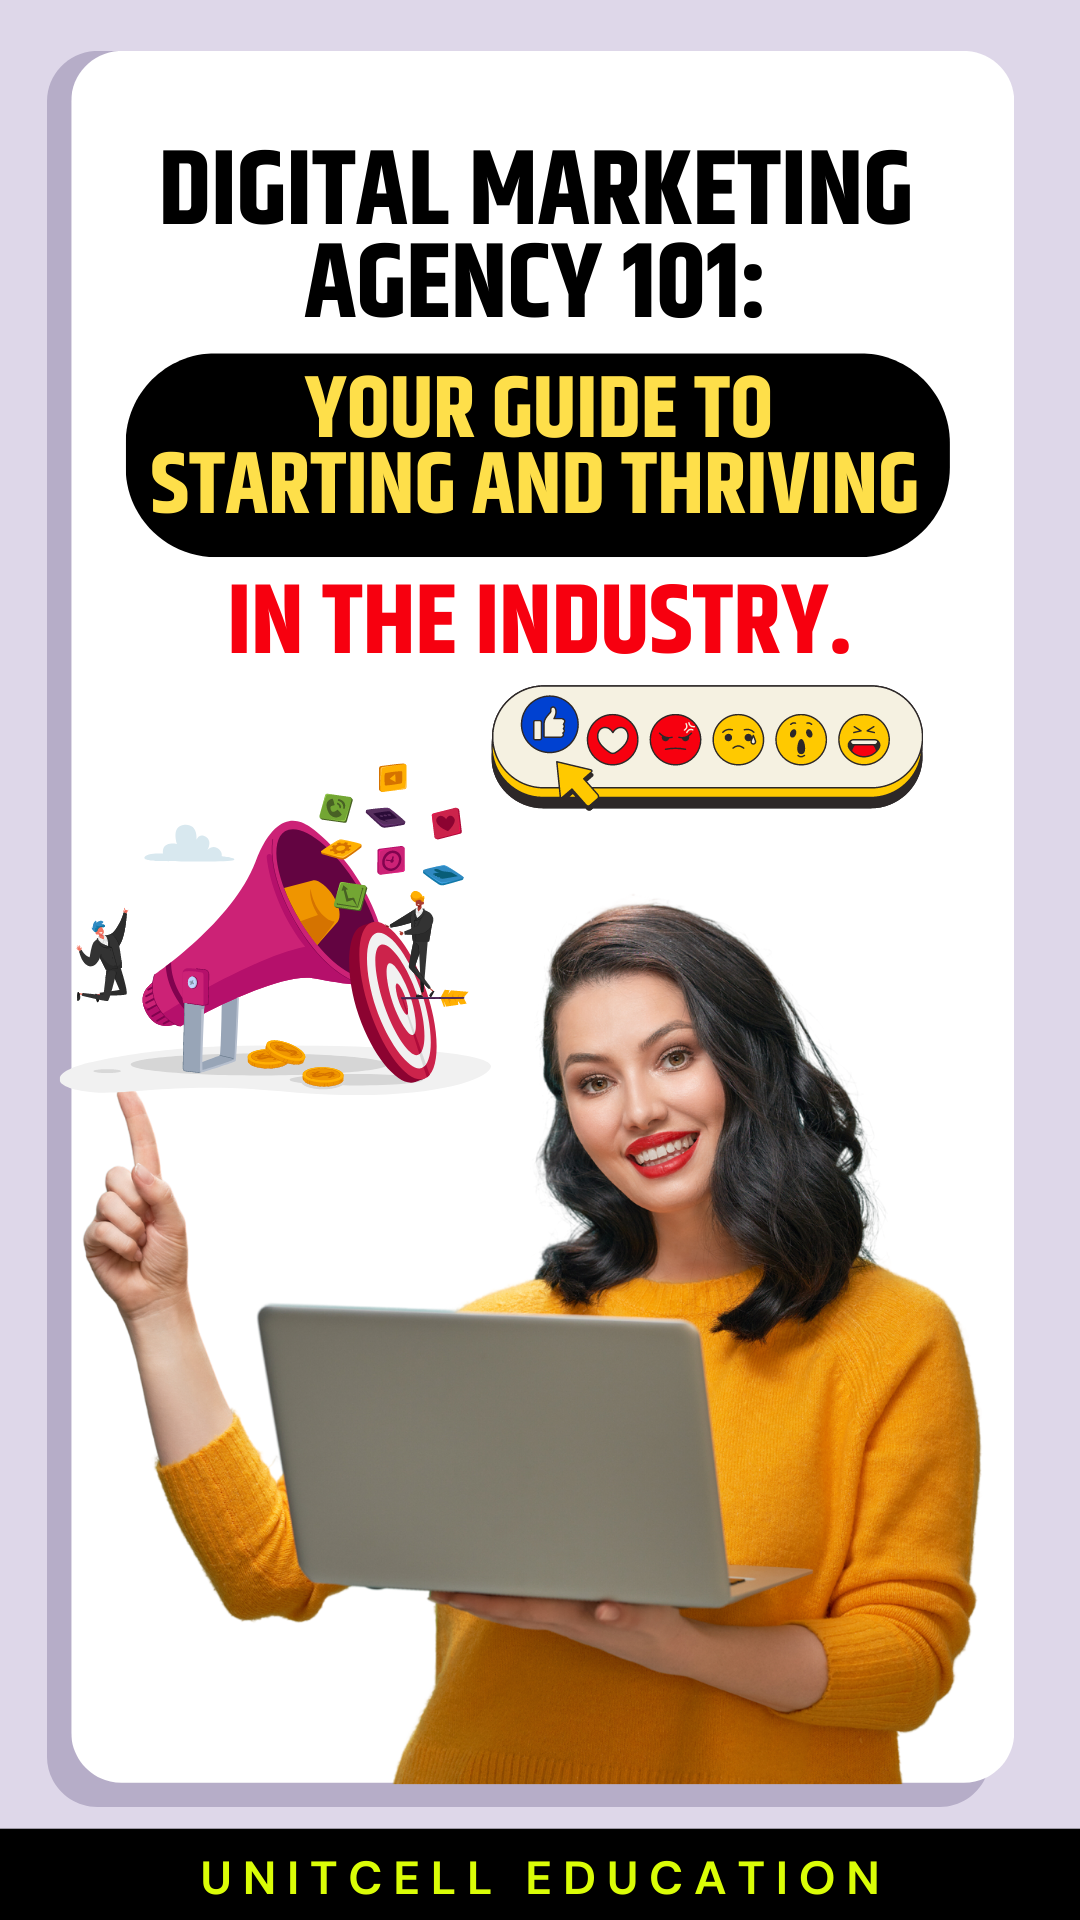 Digital Marketing Agency 101: Your Guide to Starting and Thriving in the Industry.